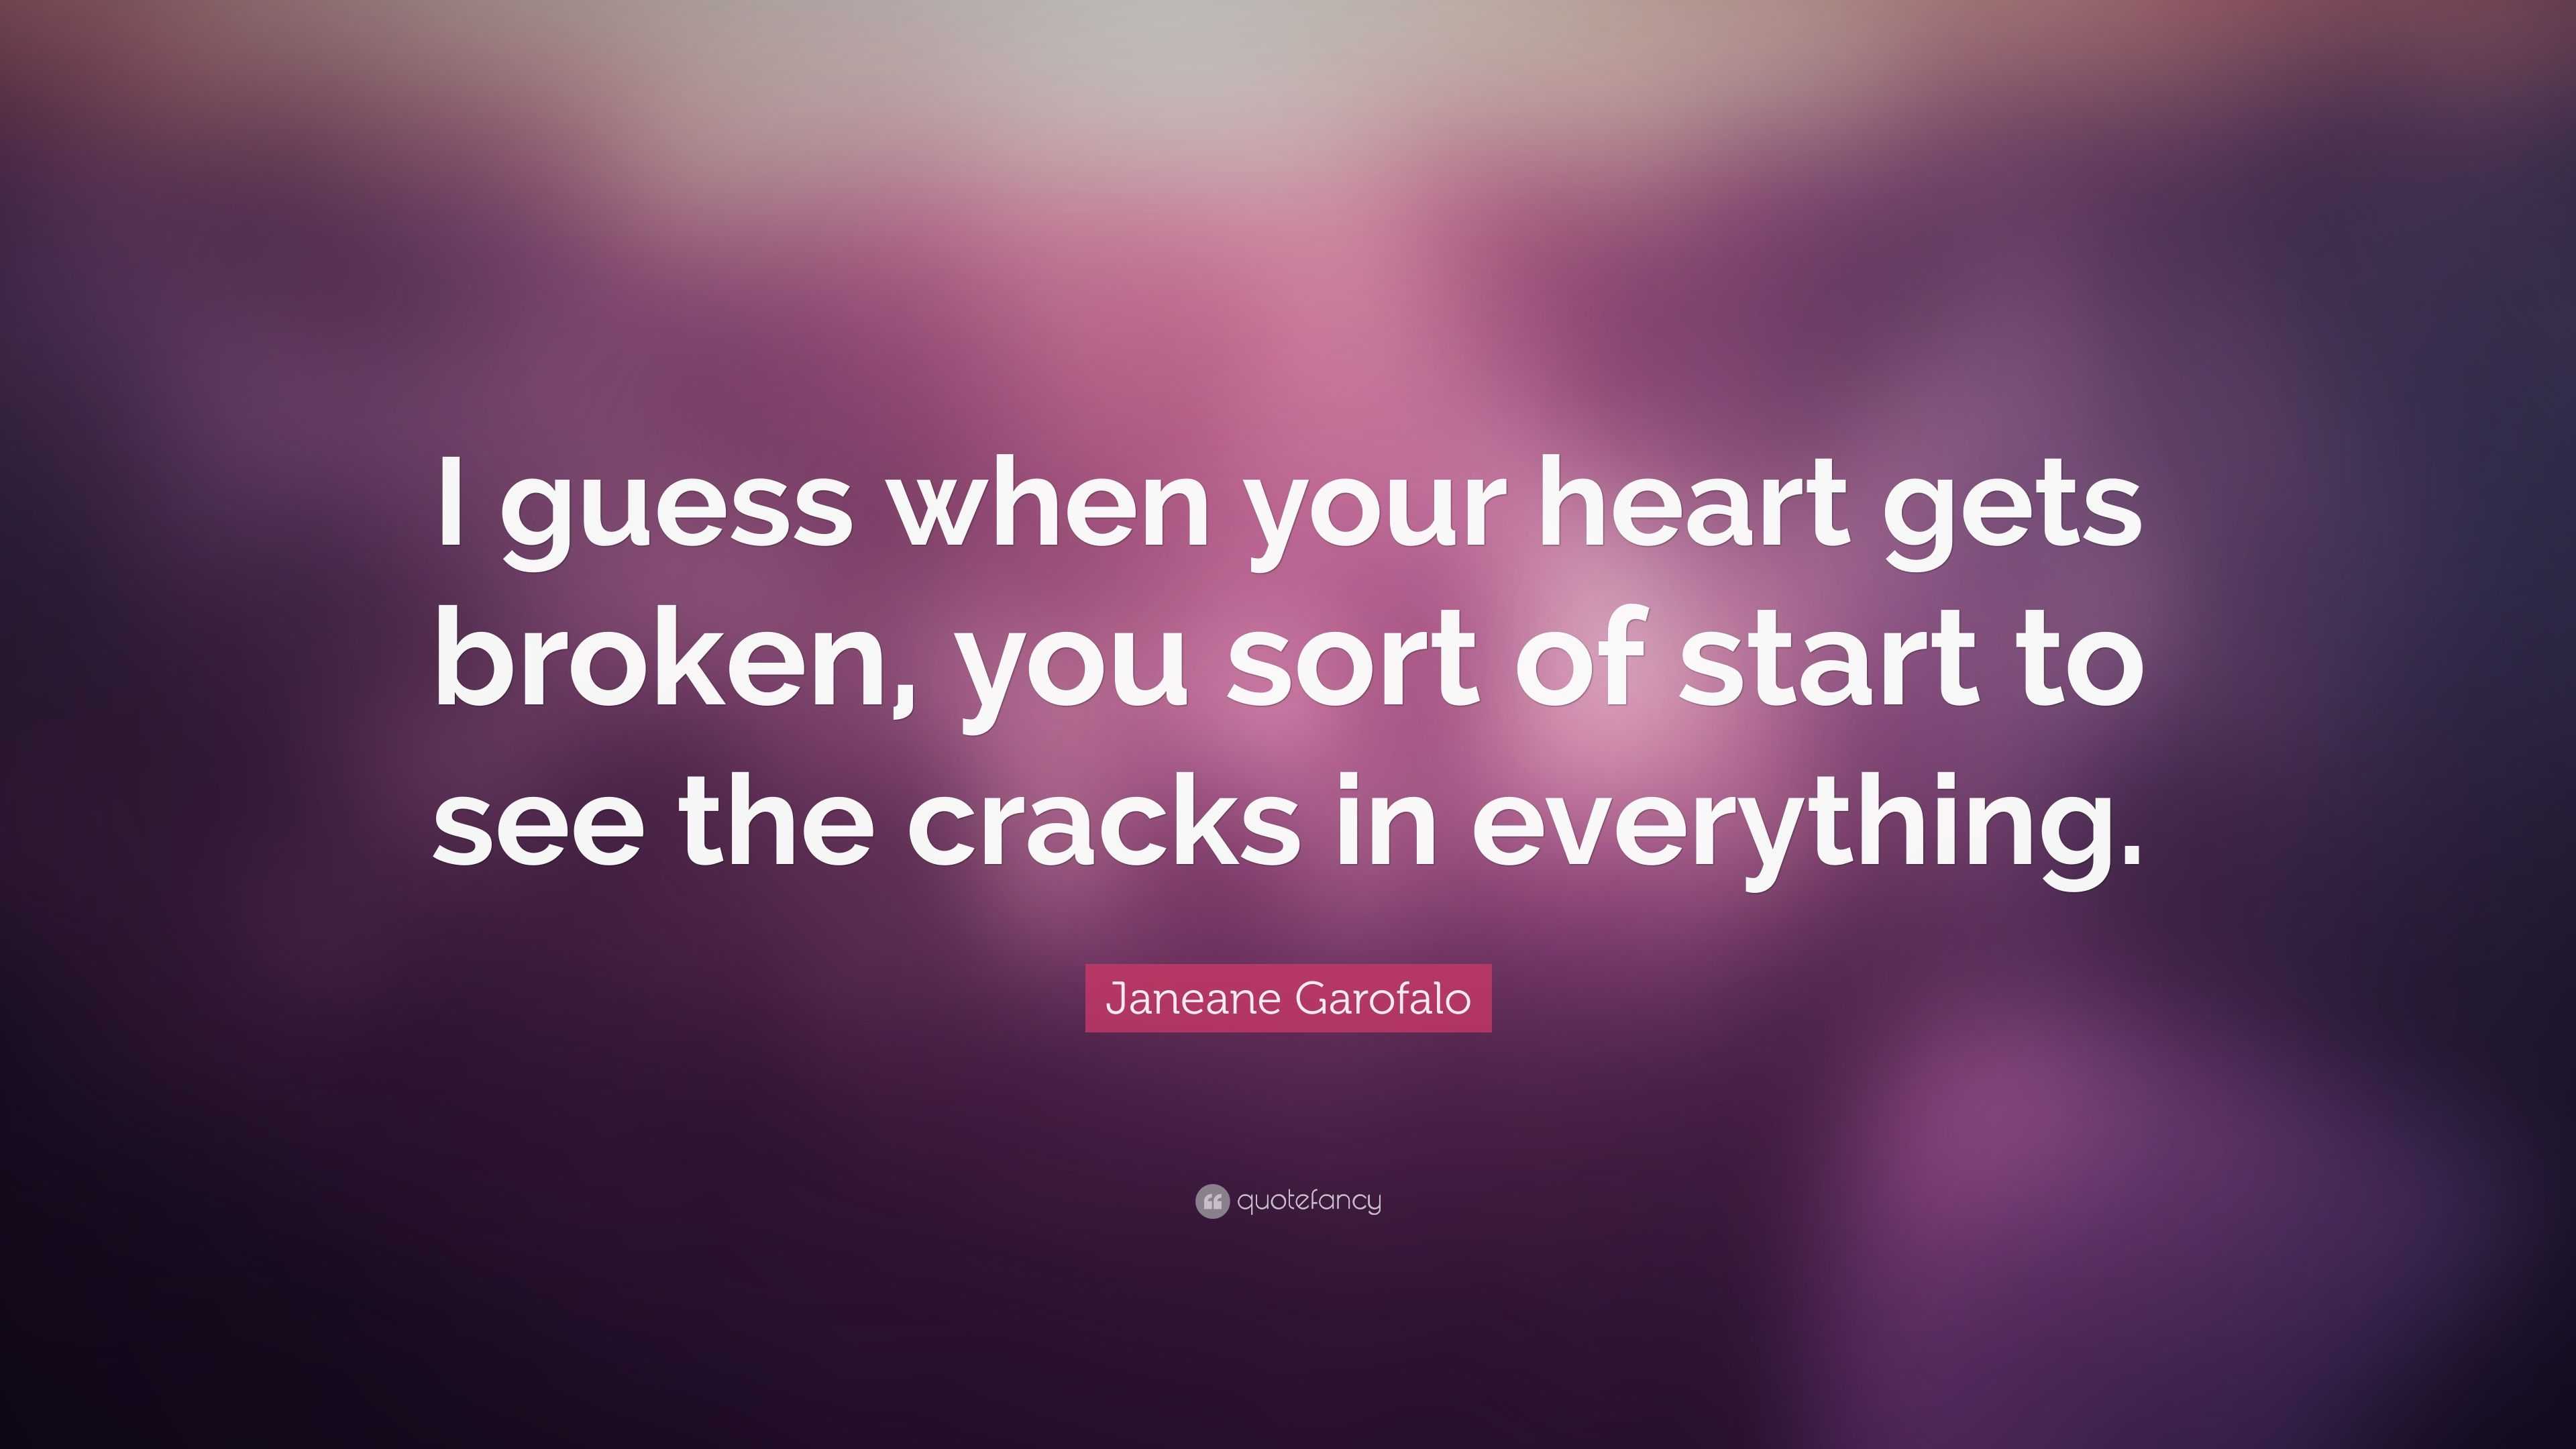 Janeane Garofalo Quote: “I guess when your heart gets broken, you sort ...